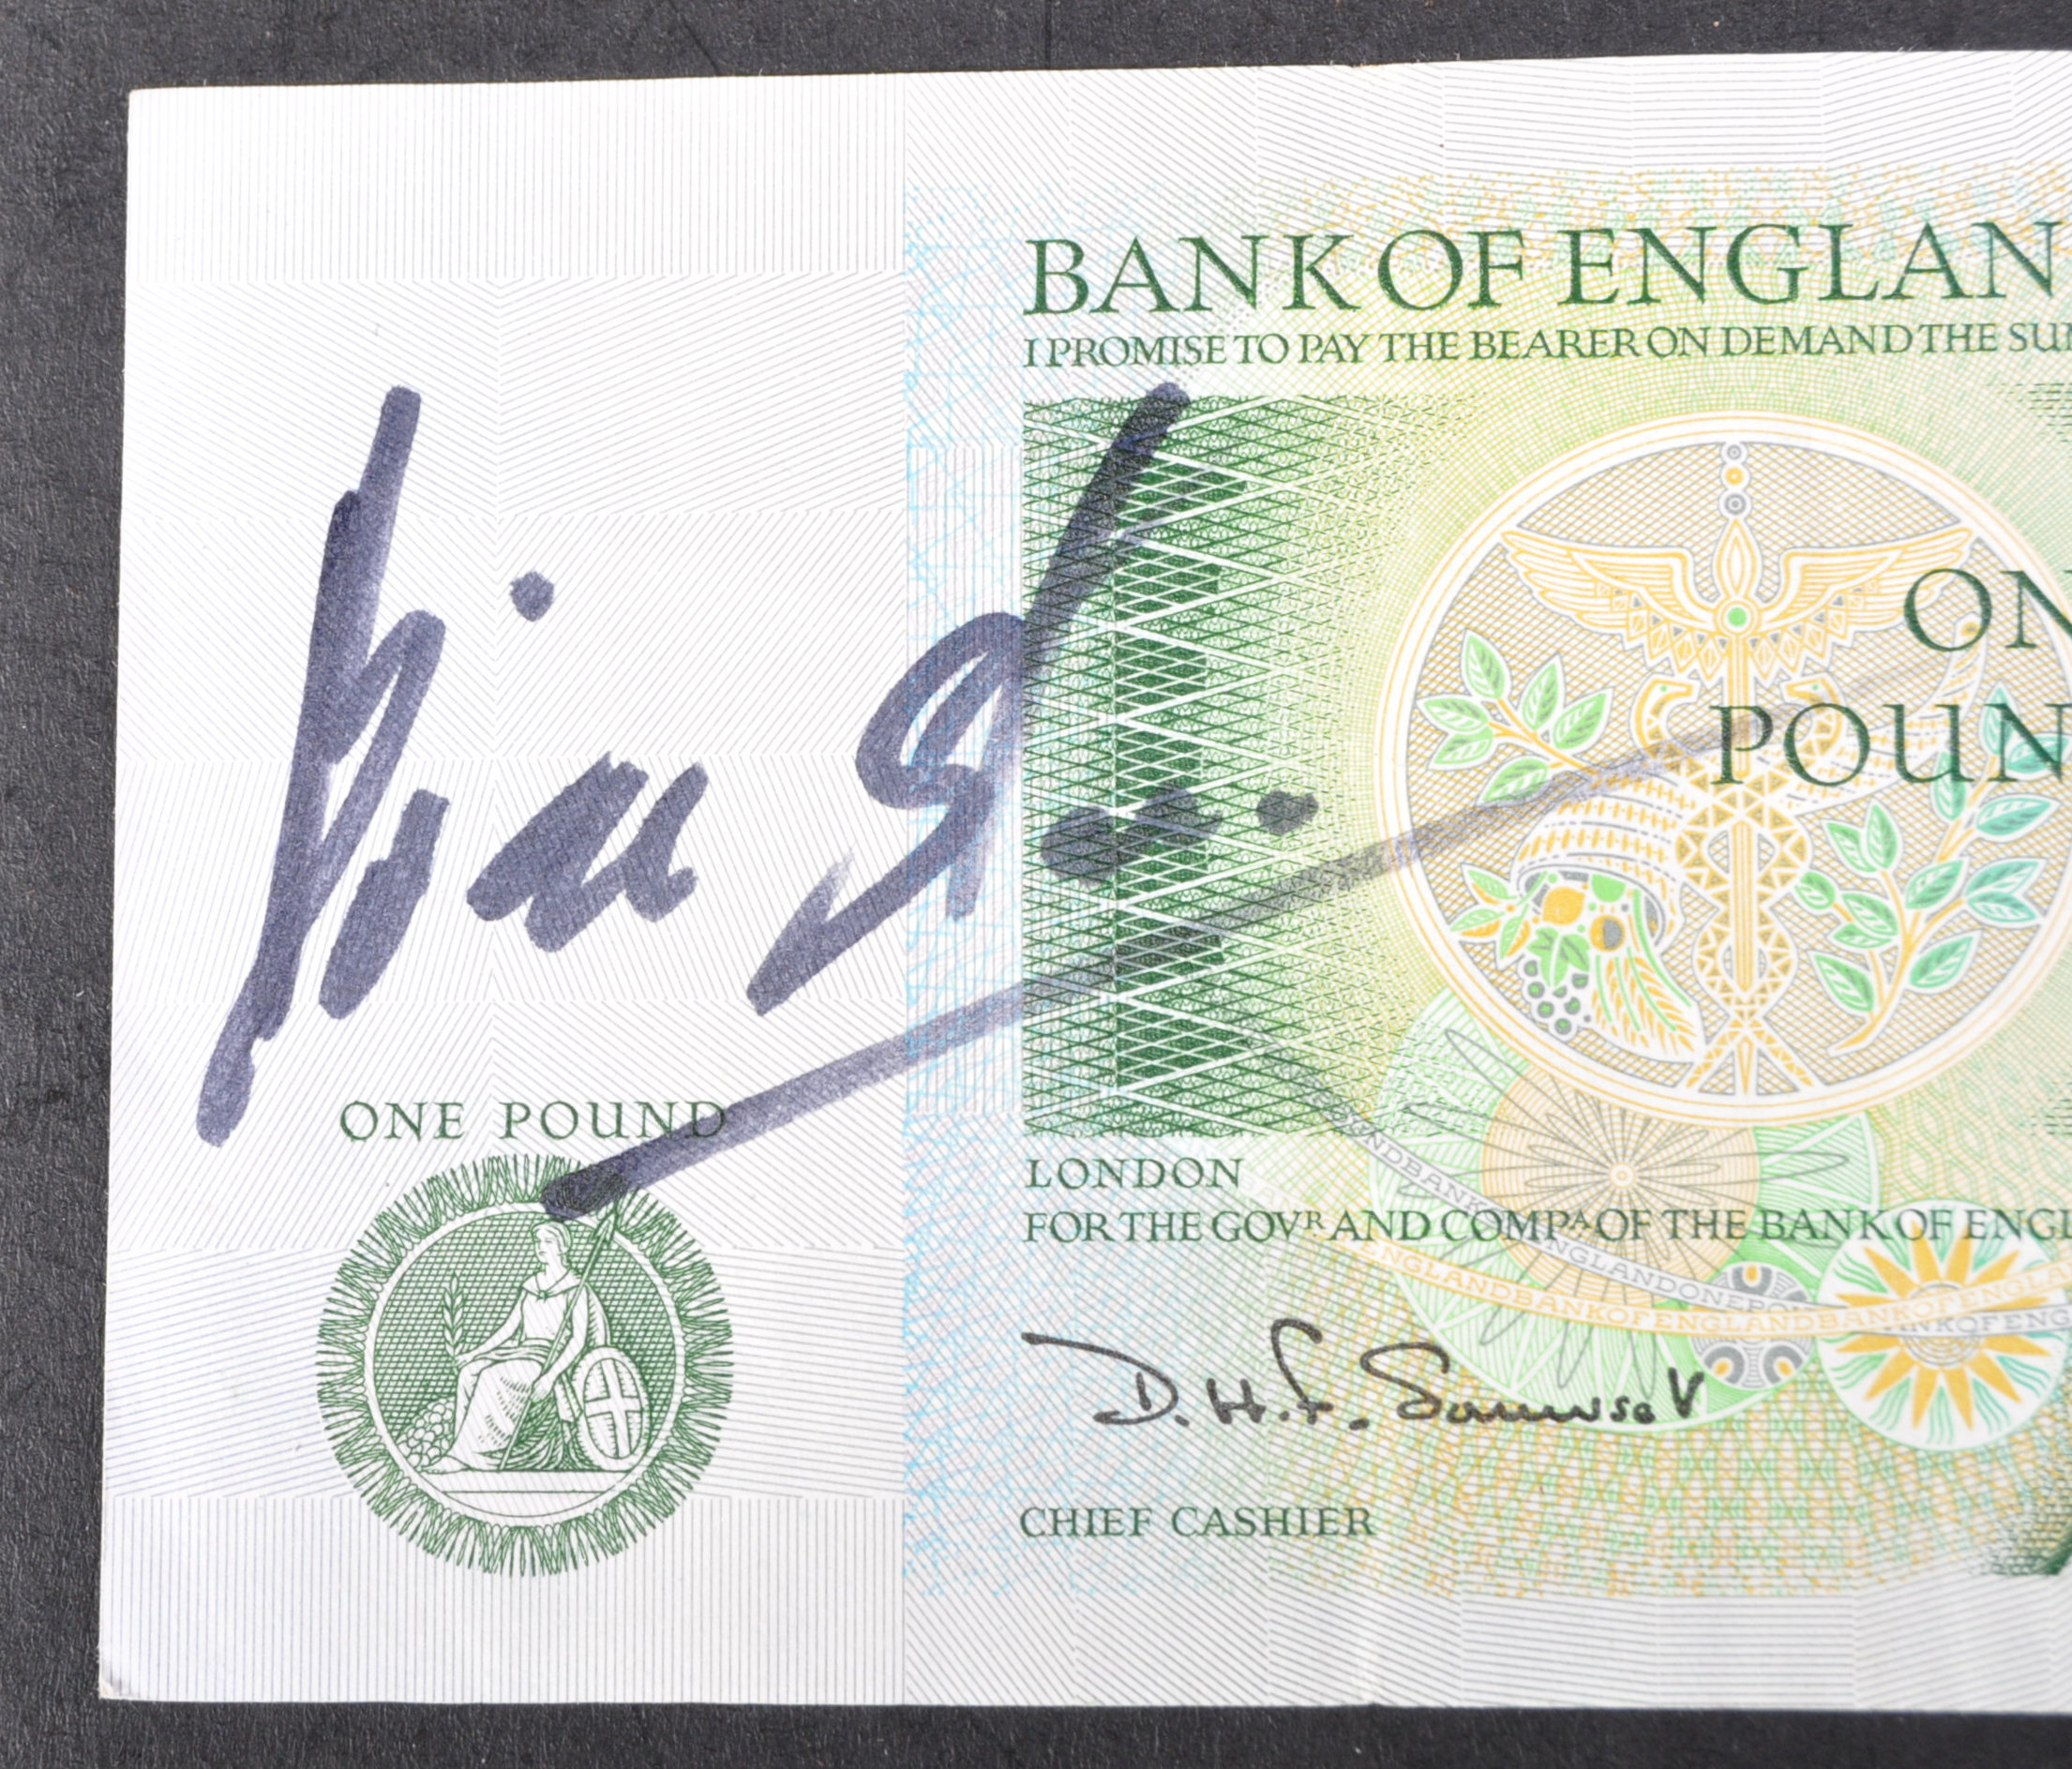 GREAT TRAIN ROBBERY - BRIAN STONE & RONNIE BIGGS SIGNED BANK NOTES - Image 4 of 5